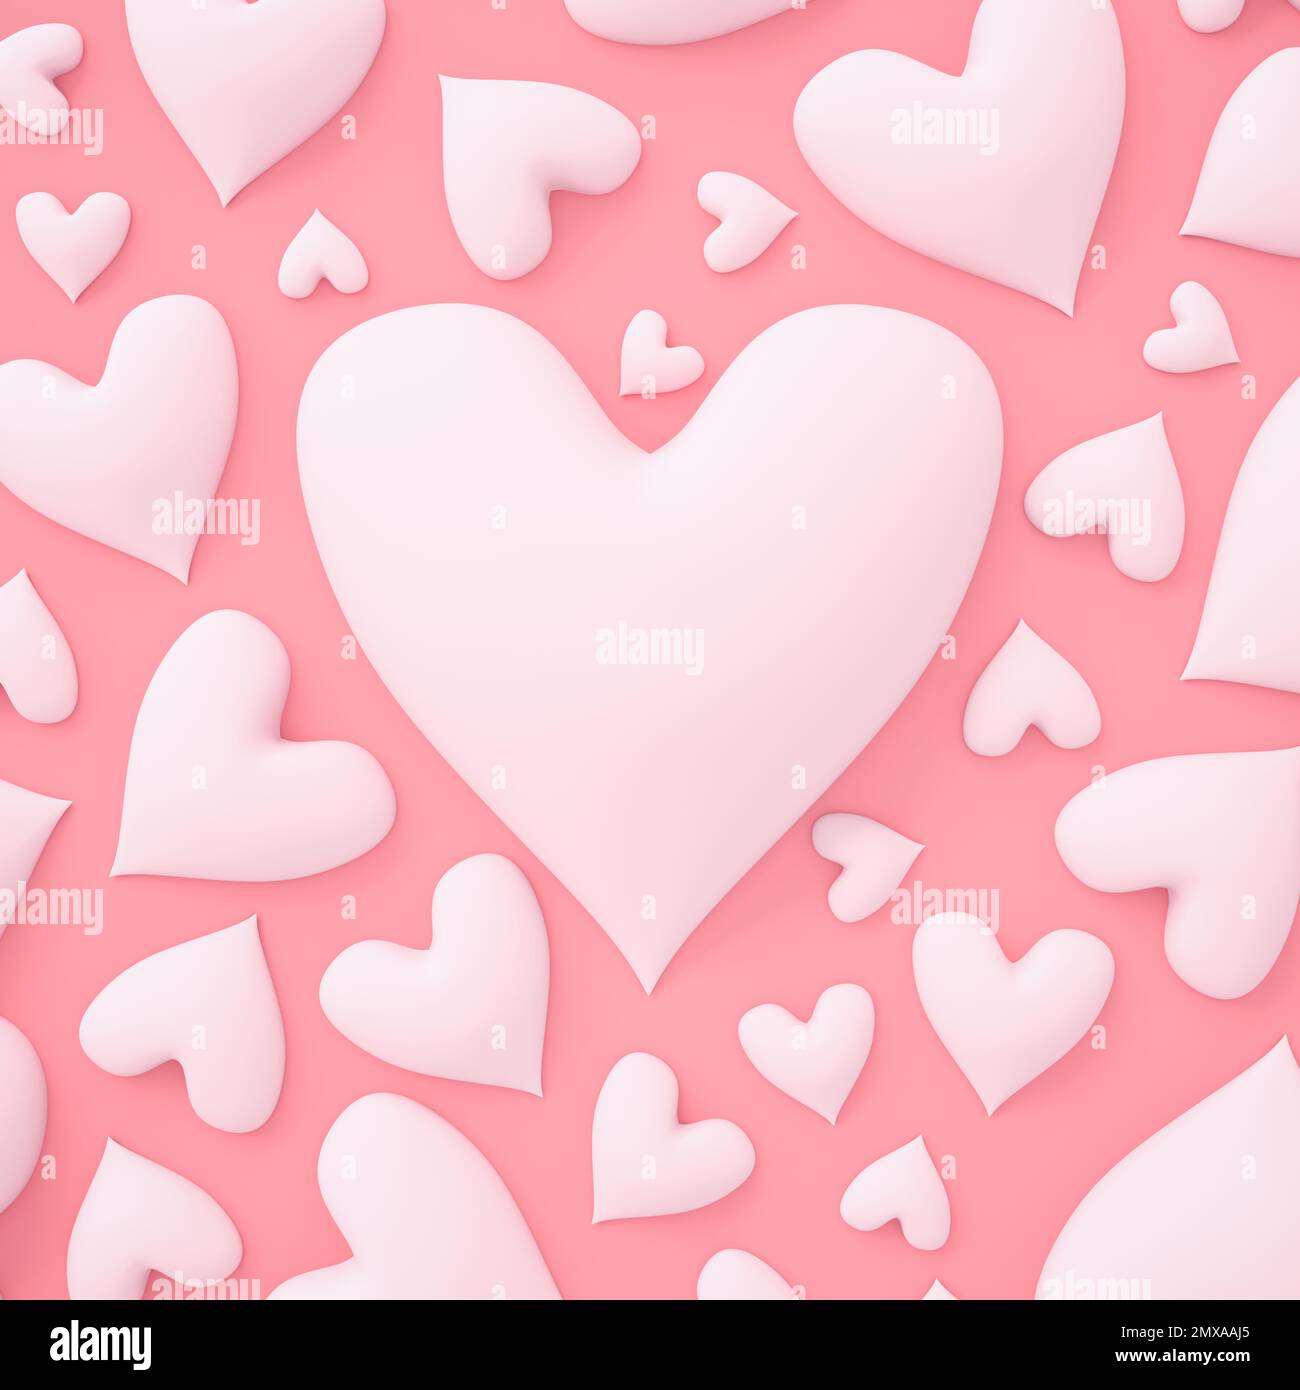 White hearts on pink background with large center heart for Valentine's day or other romantic themed background. 3d Render. Stock Photo